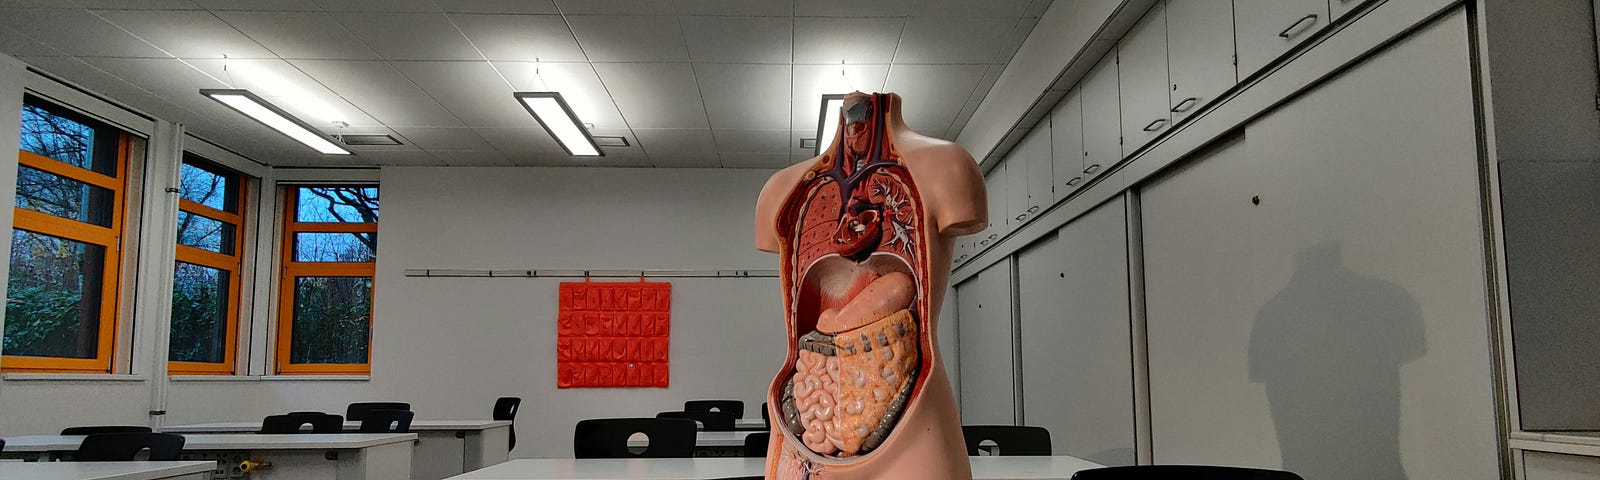 Anatomy mannequin stand son a desk in a classroom